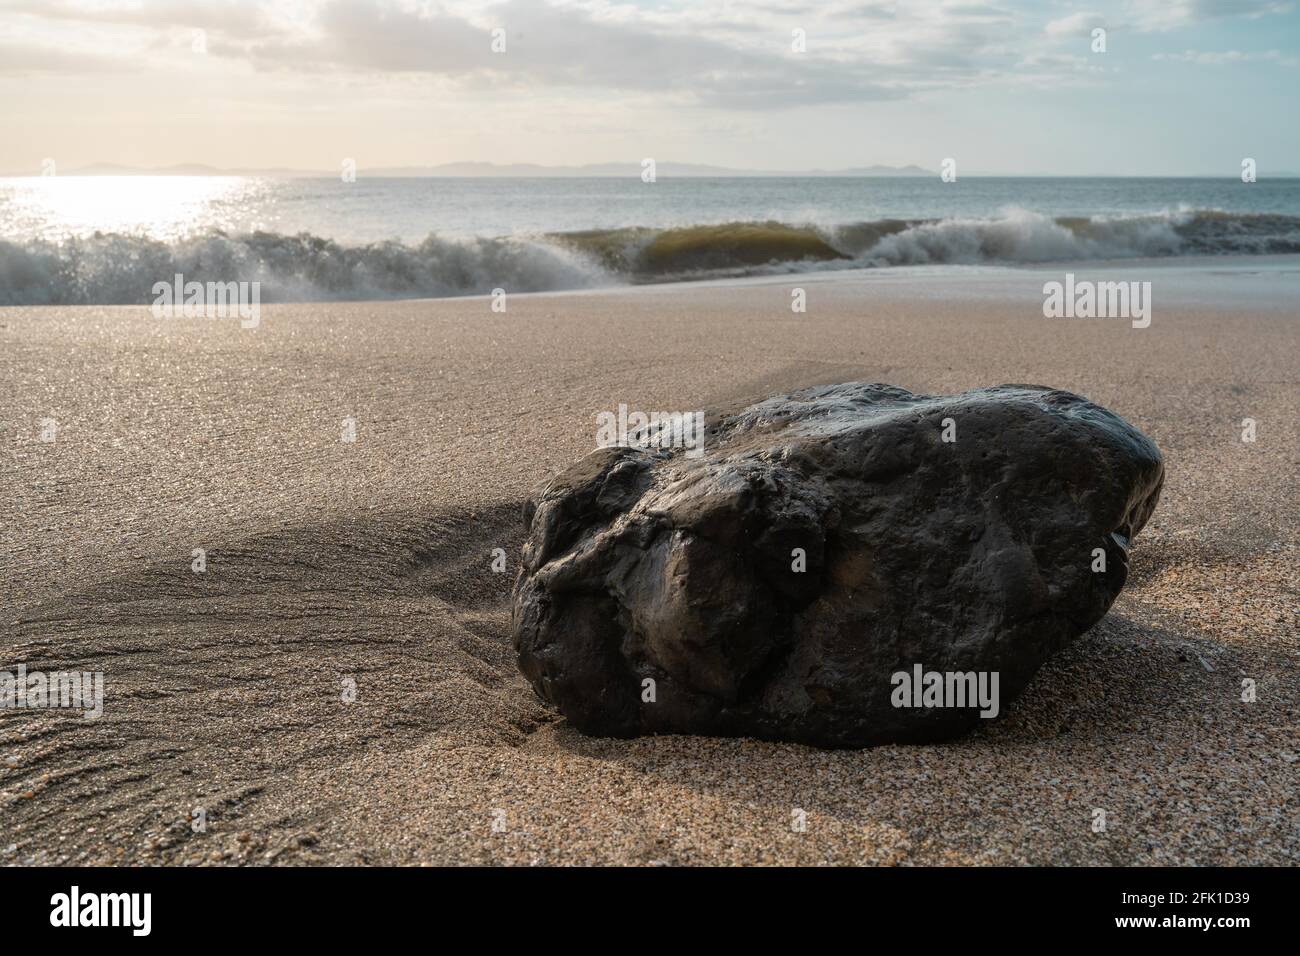 PANAMá, PANAMA - Apr 25, 2021: Rock laying on the sand of a beach on a sunset, waves hitting the beach on the blue sky Stock Photo